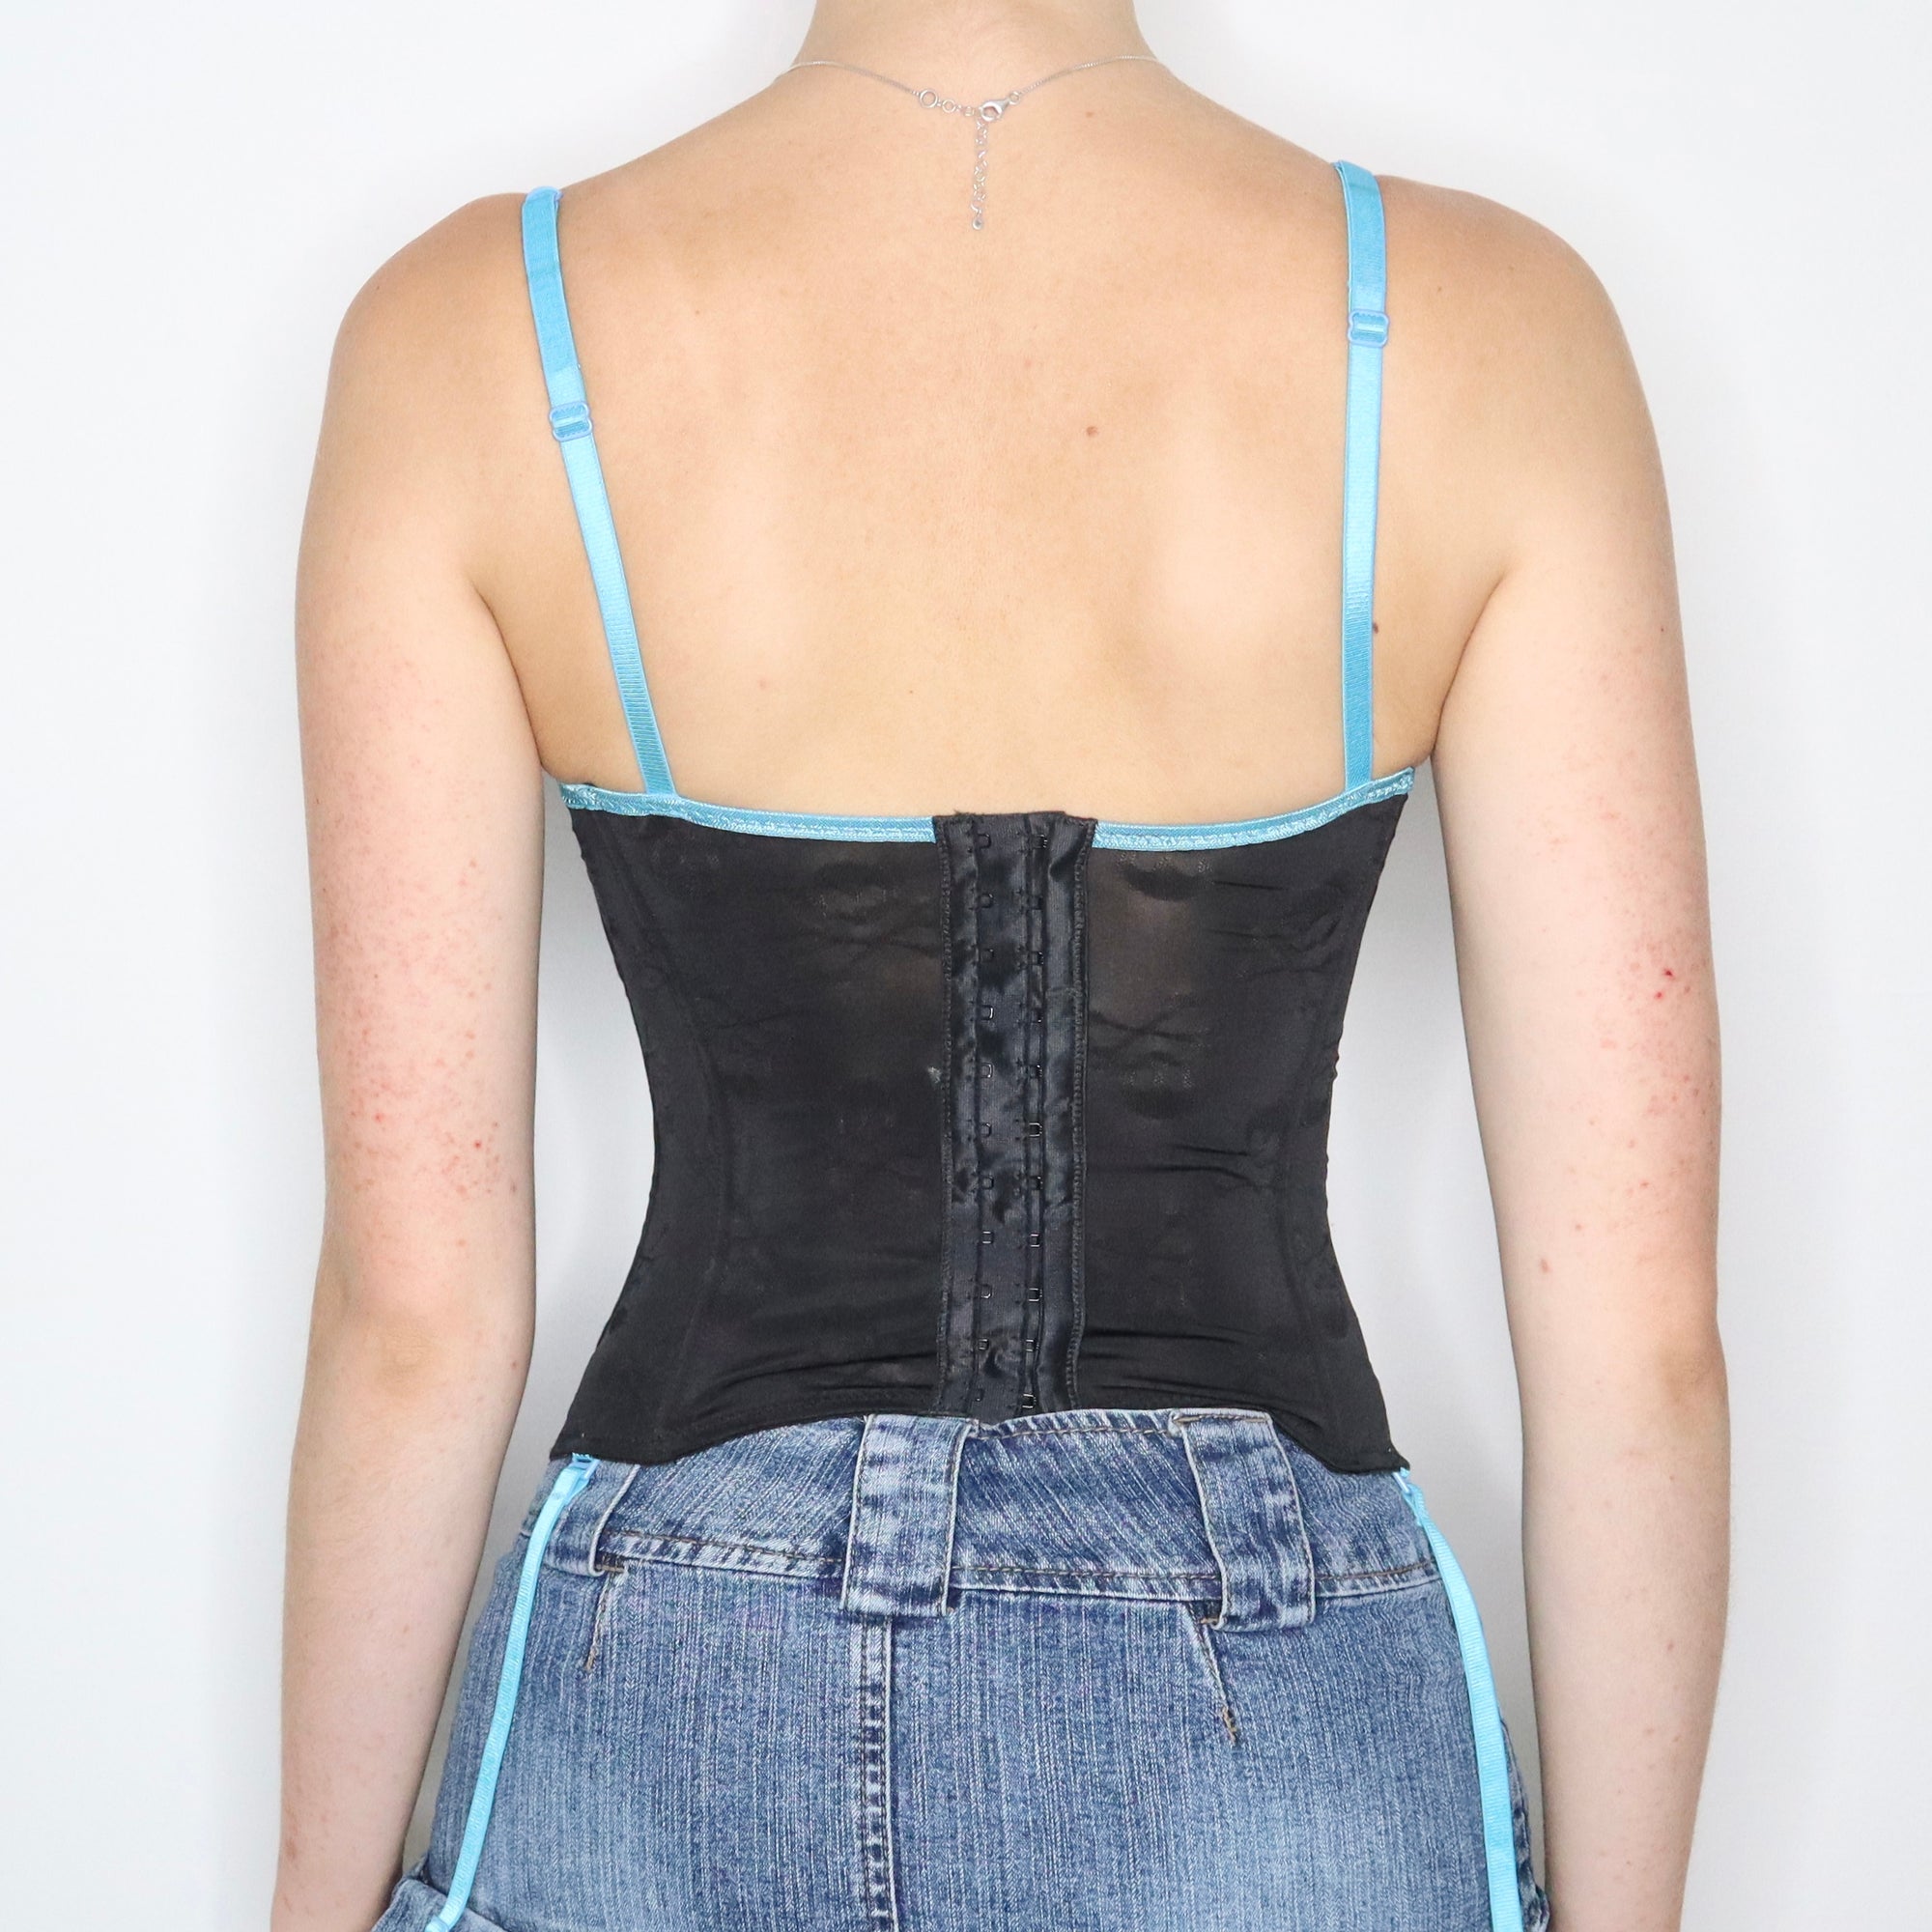 Vintage Early 2000s Morbid Threads Black and Blue Satin Corset